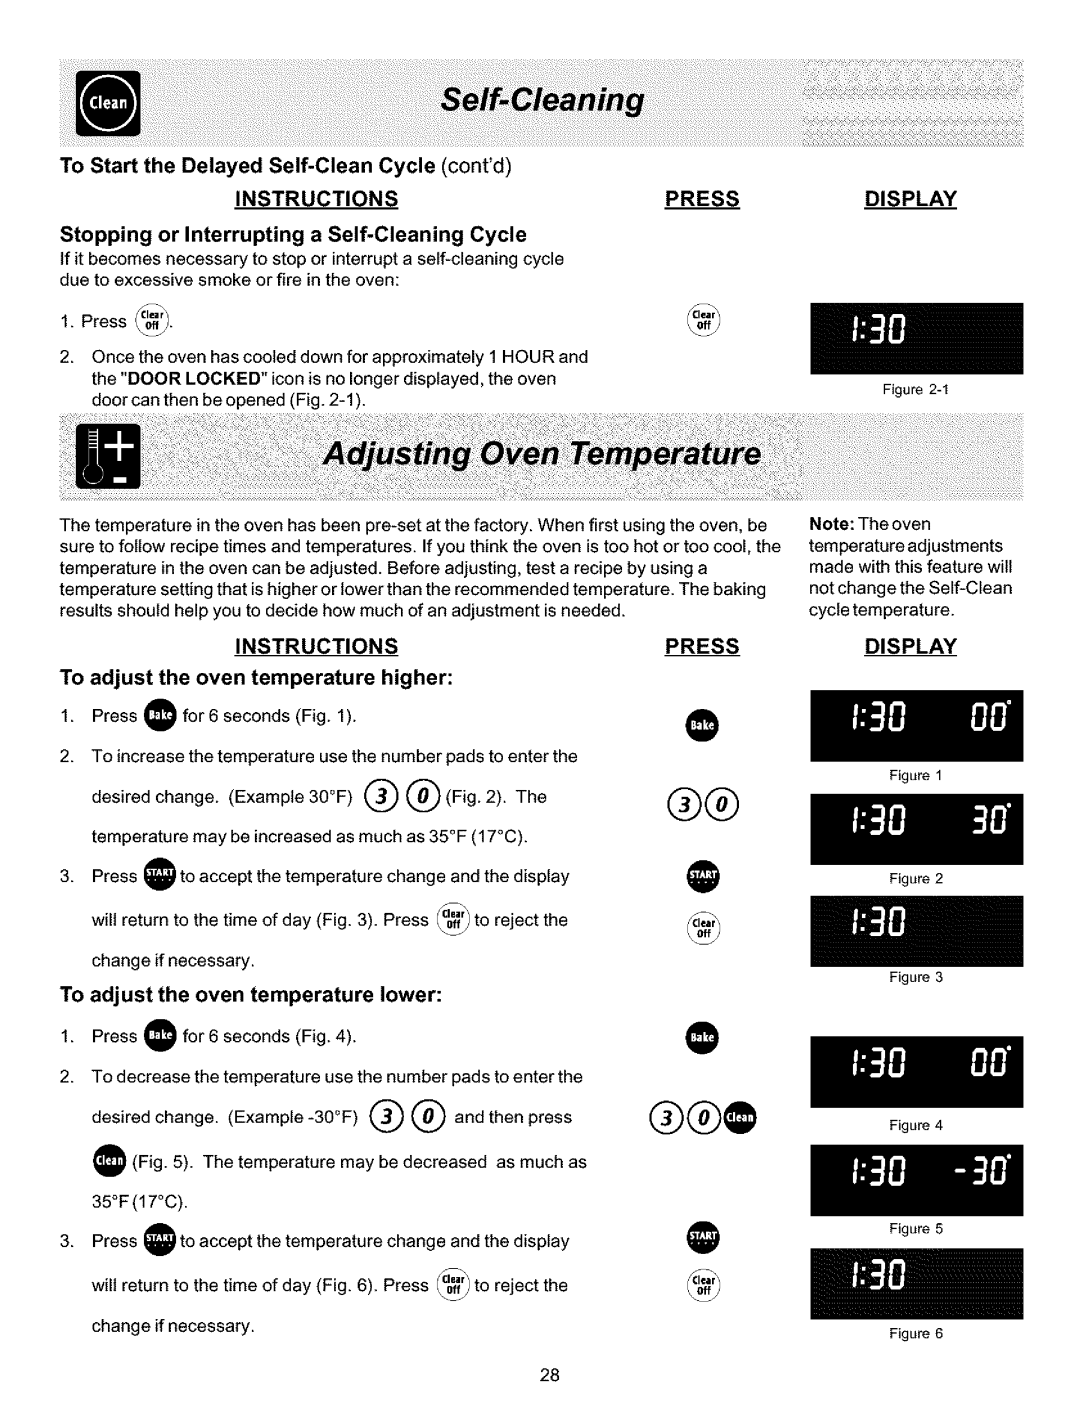 Frigidaire ES400 manual To Start the Delayed Self-CleanCycle contd, Press, adjust, the oven, temperature, lower, Display 